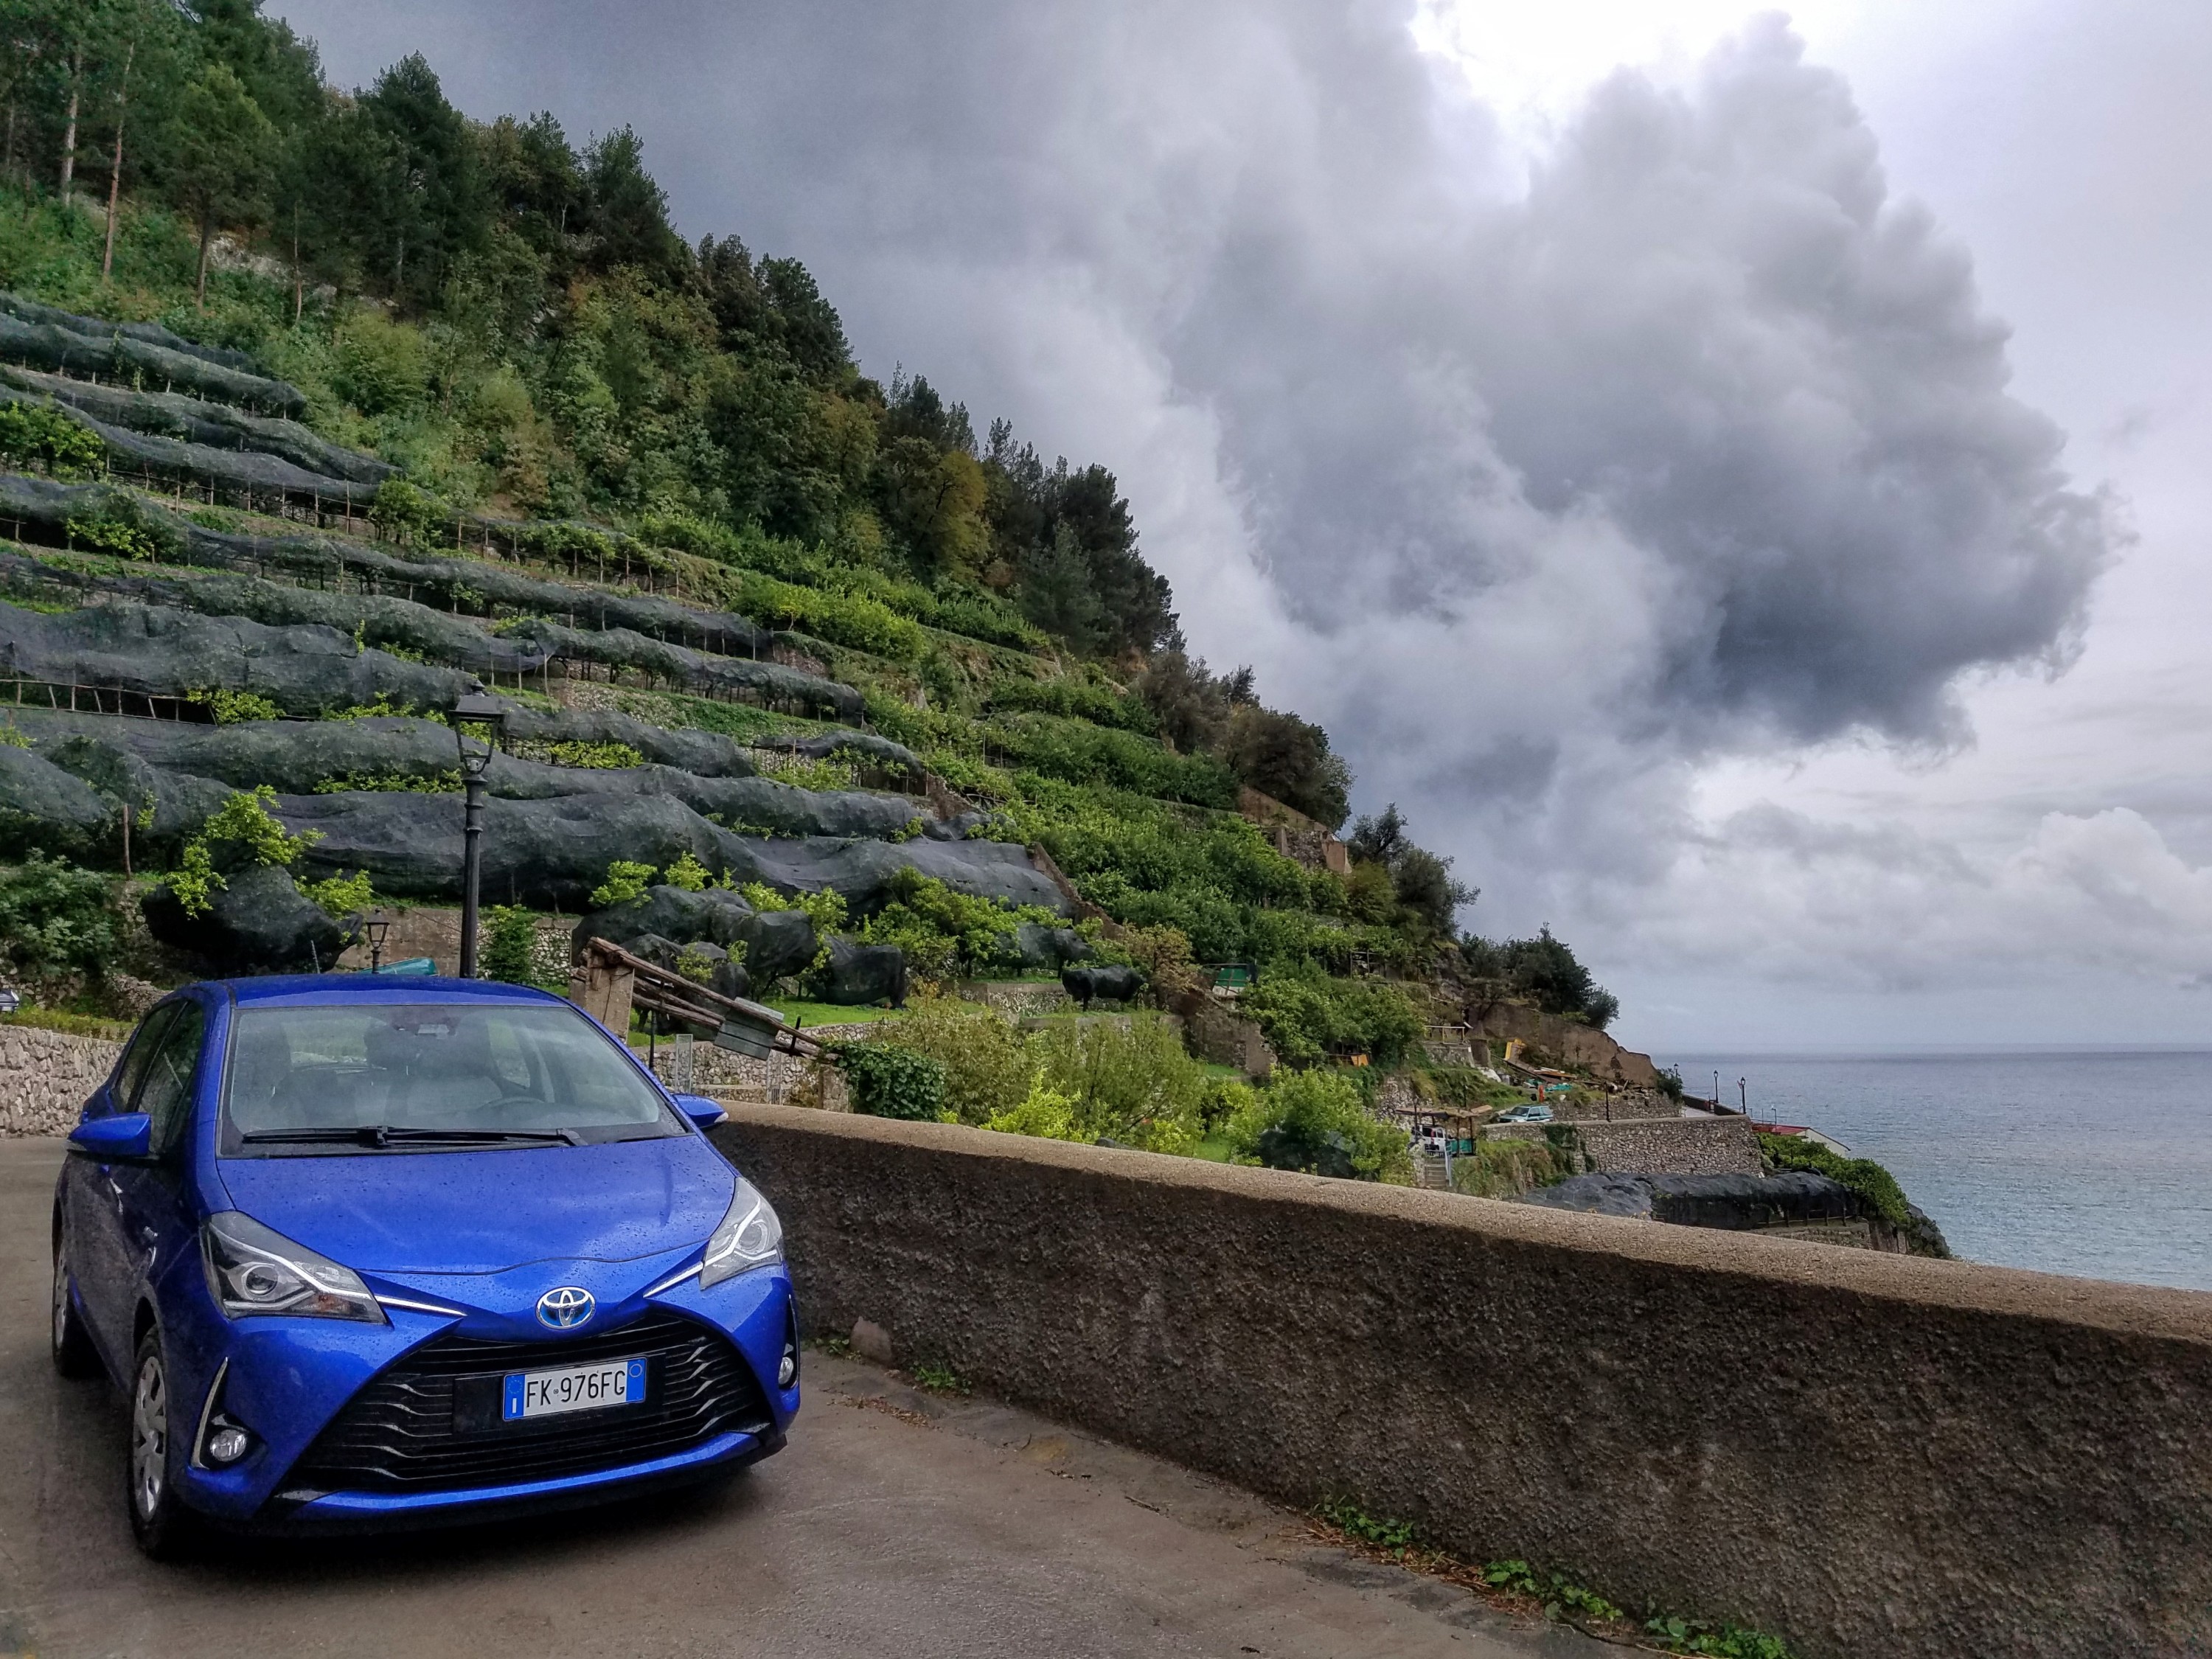 Blue Toyota parked on a road with a hillside and water in view